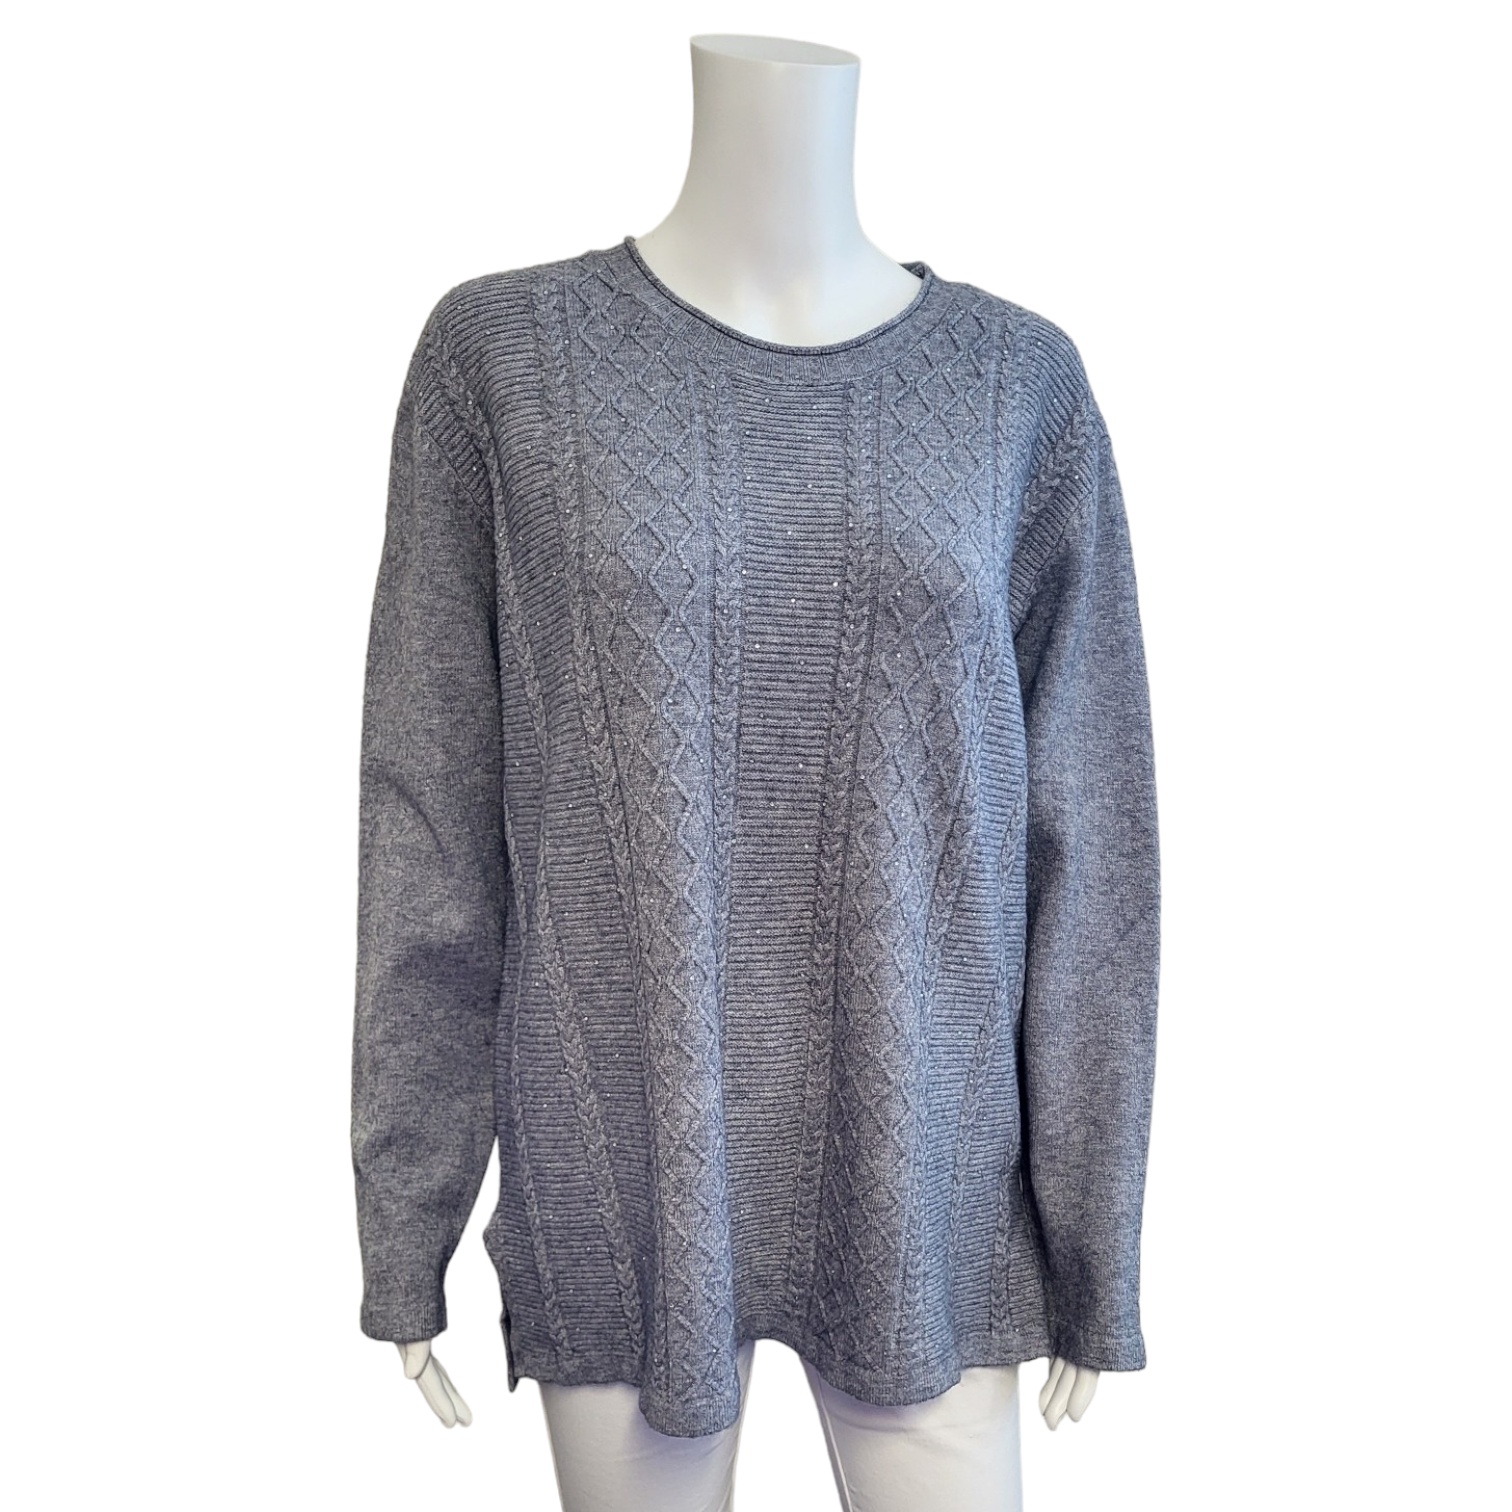 grey round necked jumper with cable and diamond design on the front. Sparkle effect on the front.